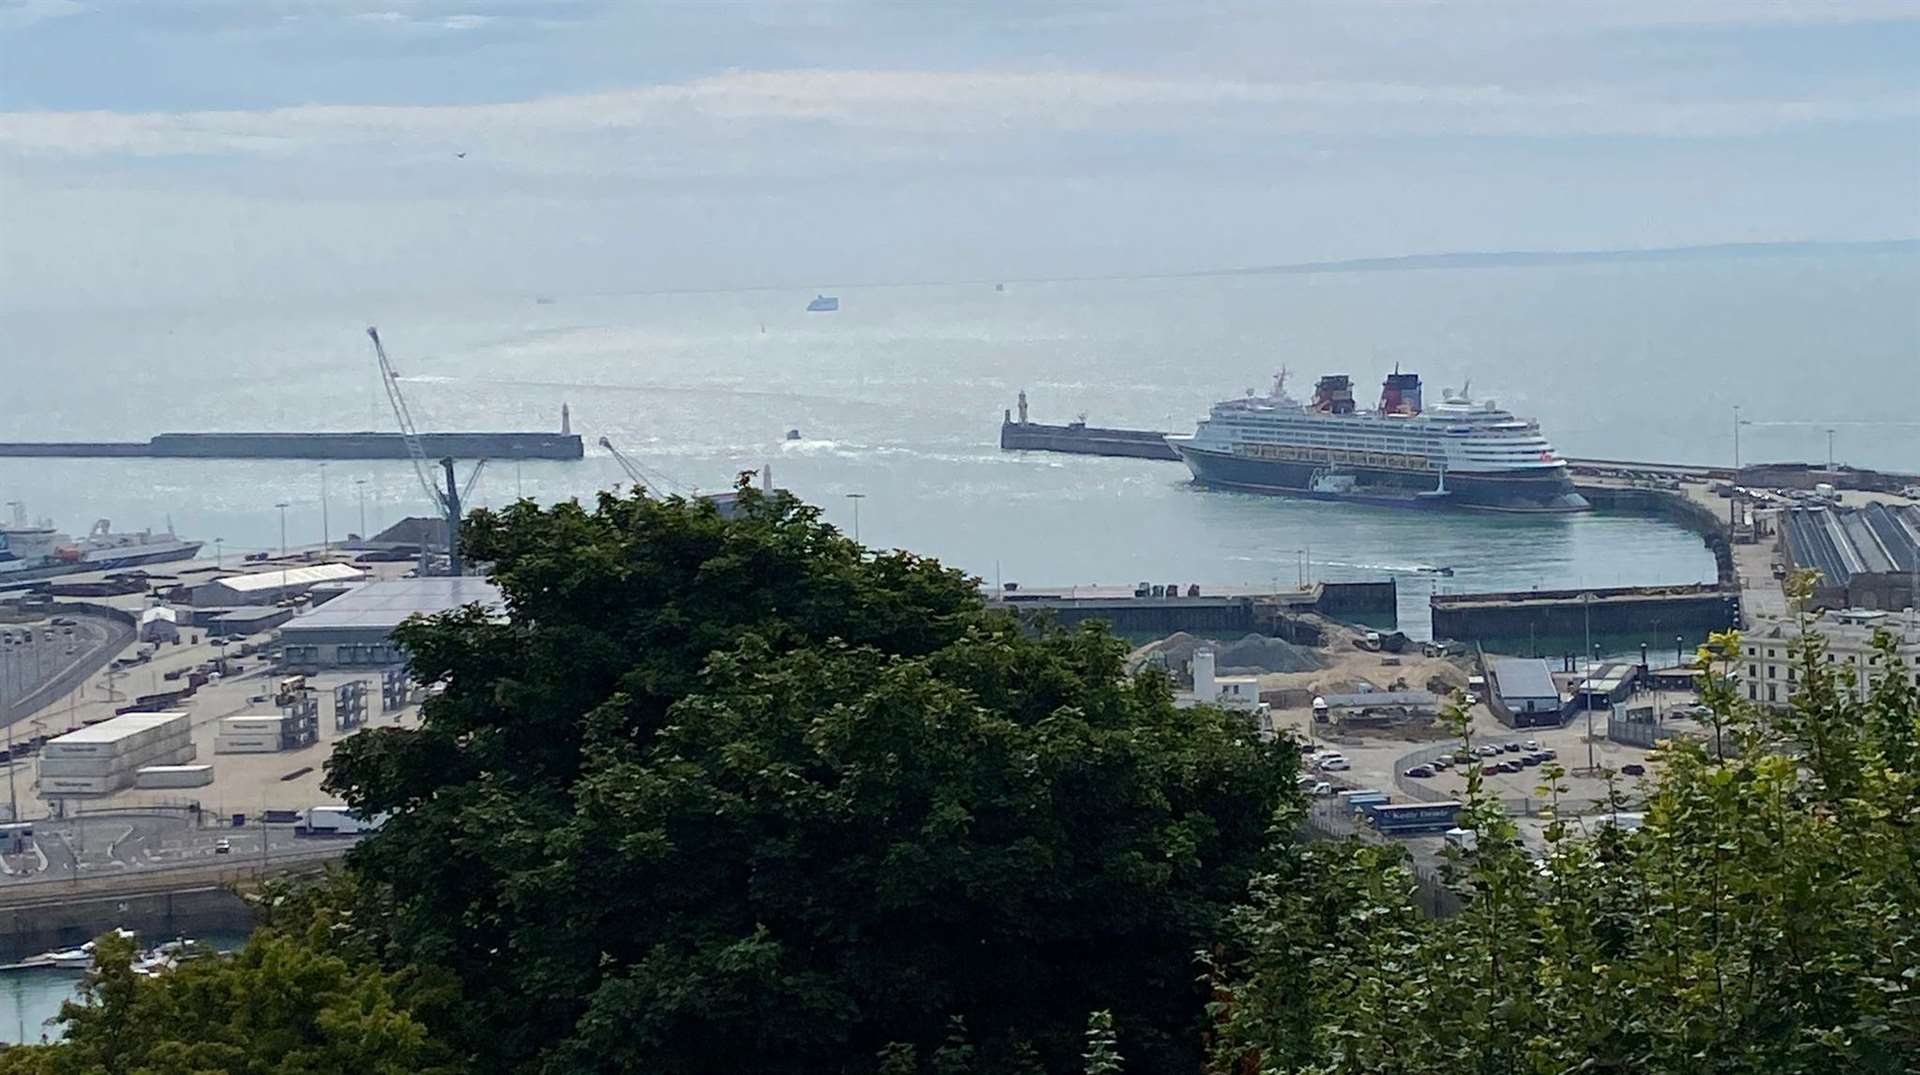 The Port Of Dover is experiencing delays